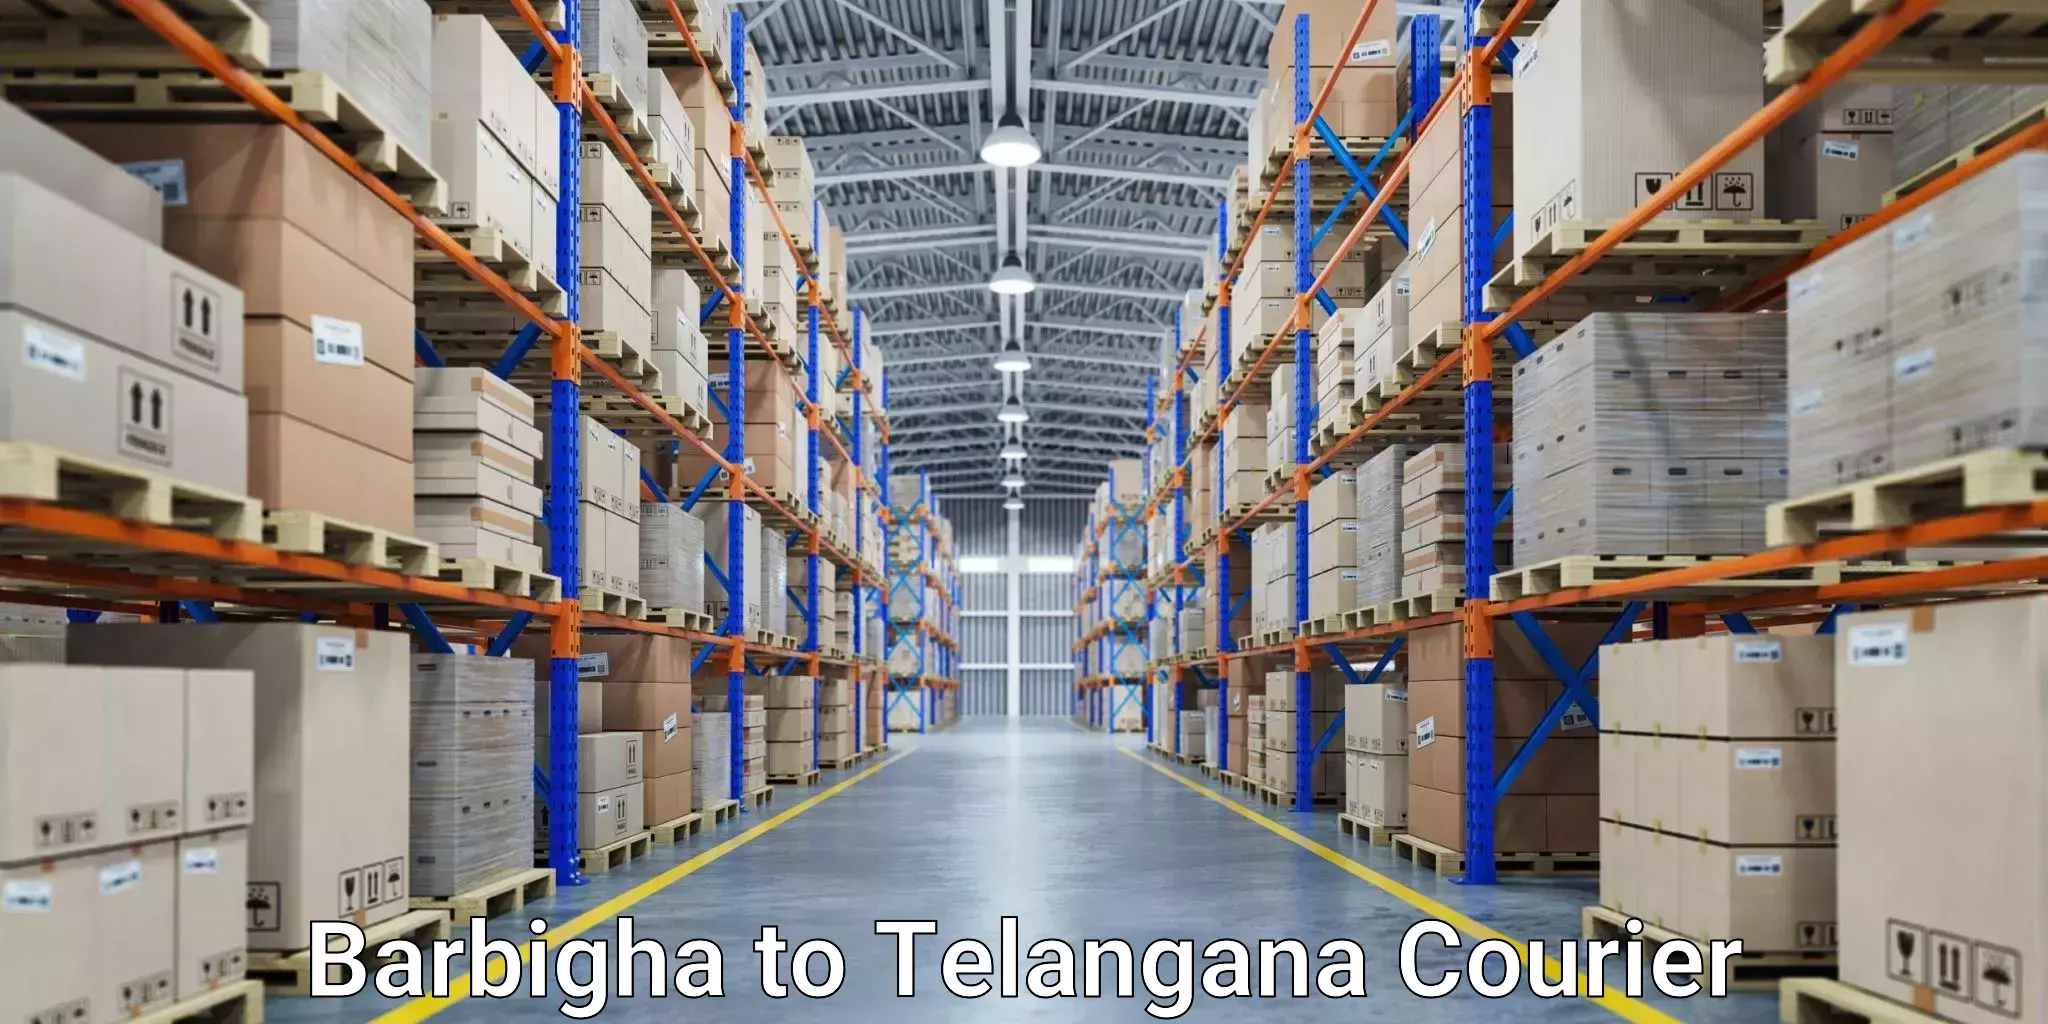 Subscription-based courier in Barbigha to Yellandu